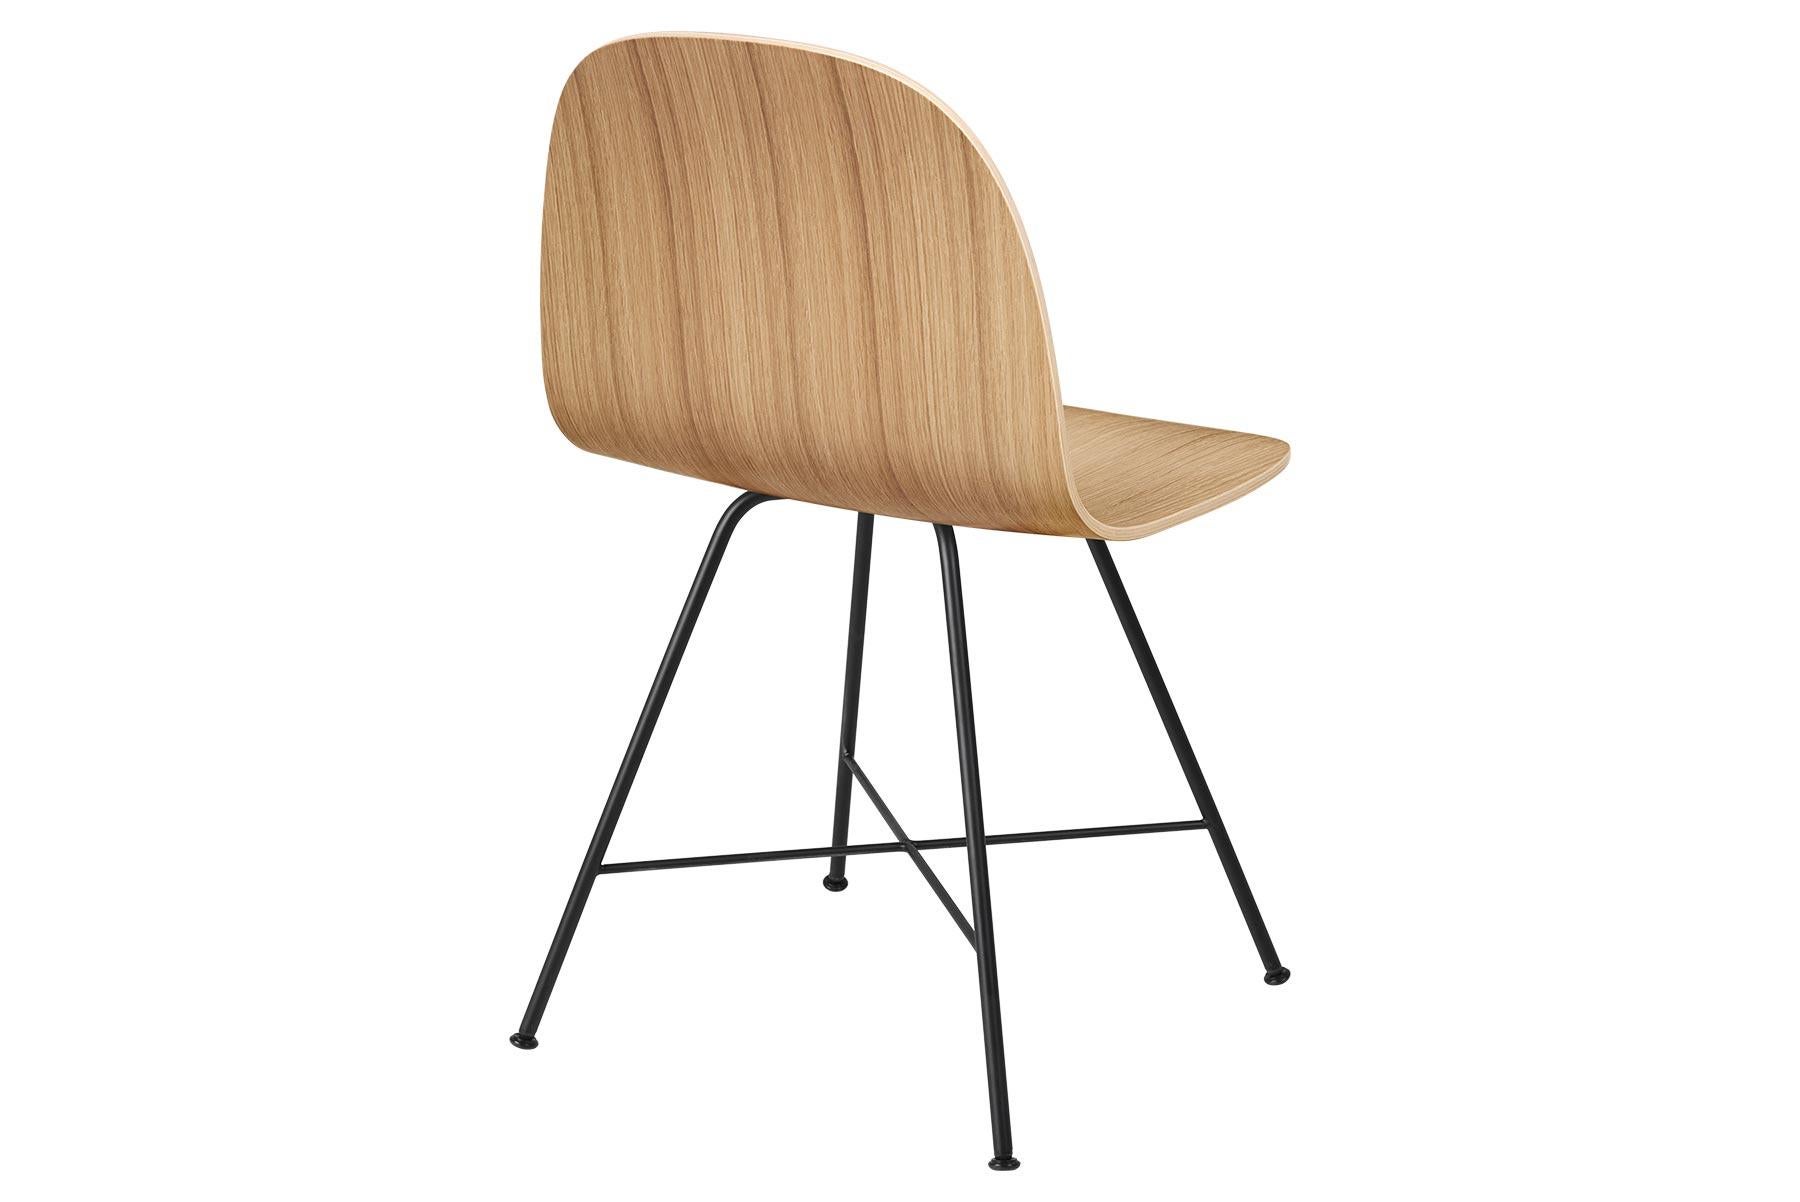 The Gubi 2D chair is a series of light dining chairs made from laminated veneer with options for front upholstery in a wide range of fabrics and leathers, suitable for both private and public spaces. Being an extension to the classic Gubi 3D chair,